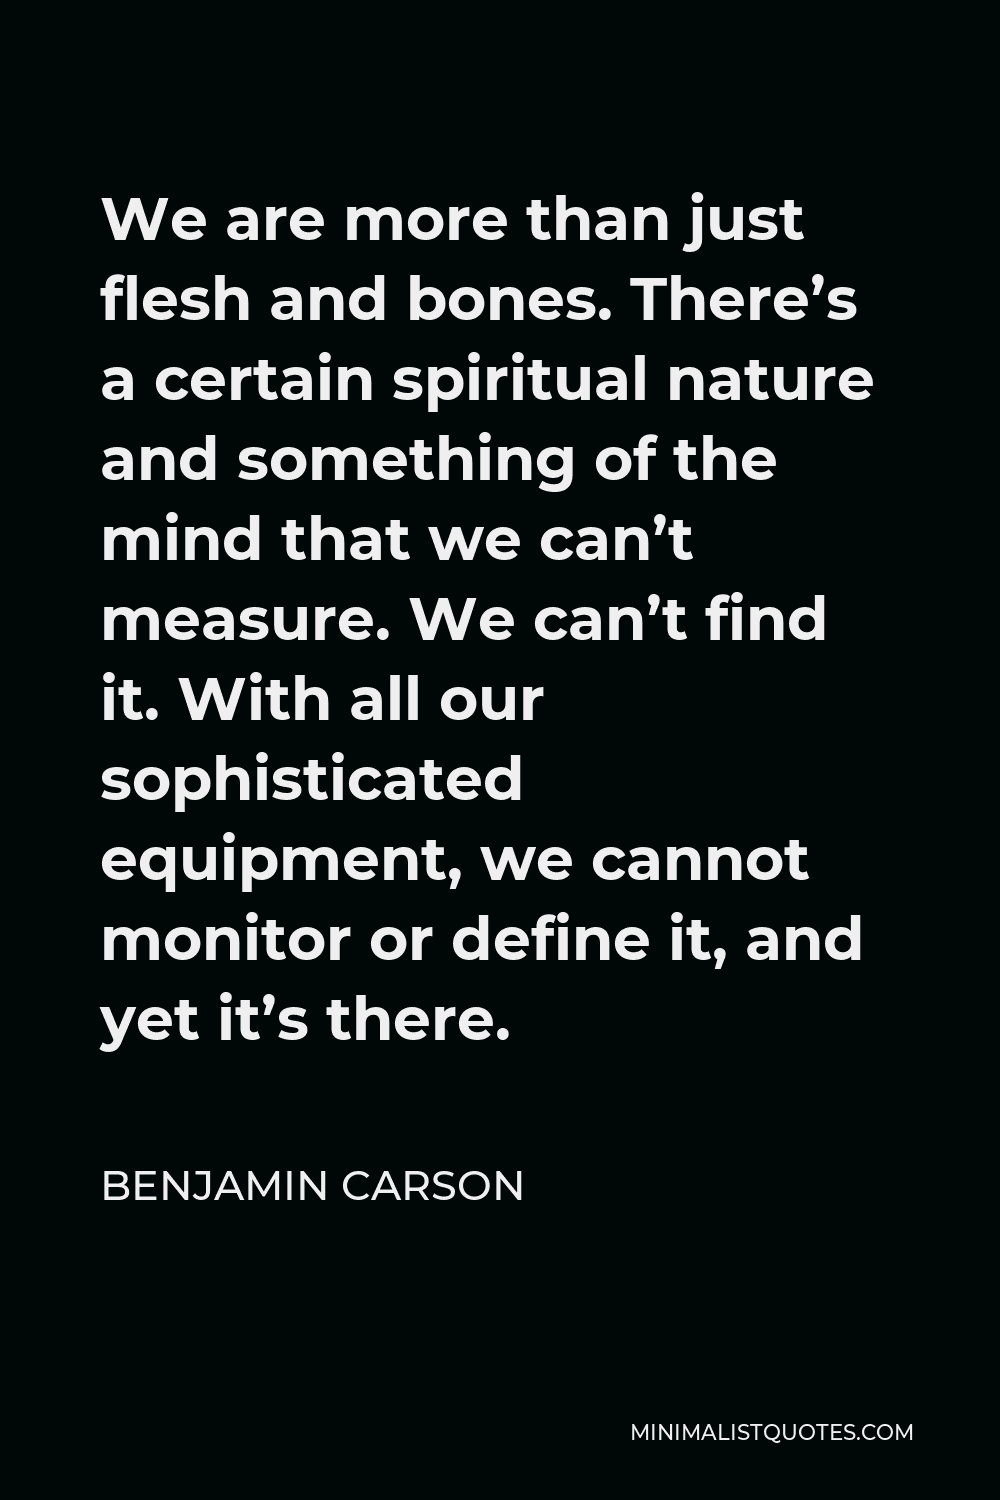 Benjamin Carson Quote - We are more than just flesh and bones. There’s a certain spiritual nature and something of the mind that we can’t measure. We can’t find it. With all our sophisticated equipment, we cannot monitor or define it, and yet it’s there.